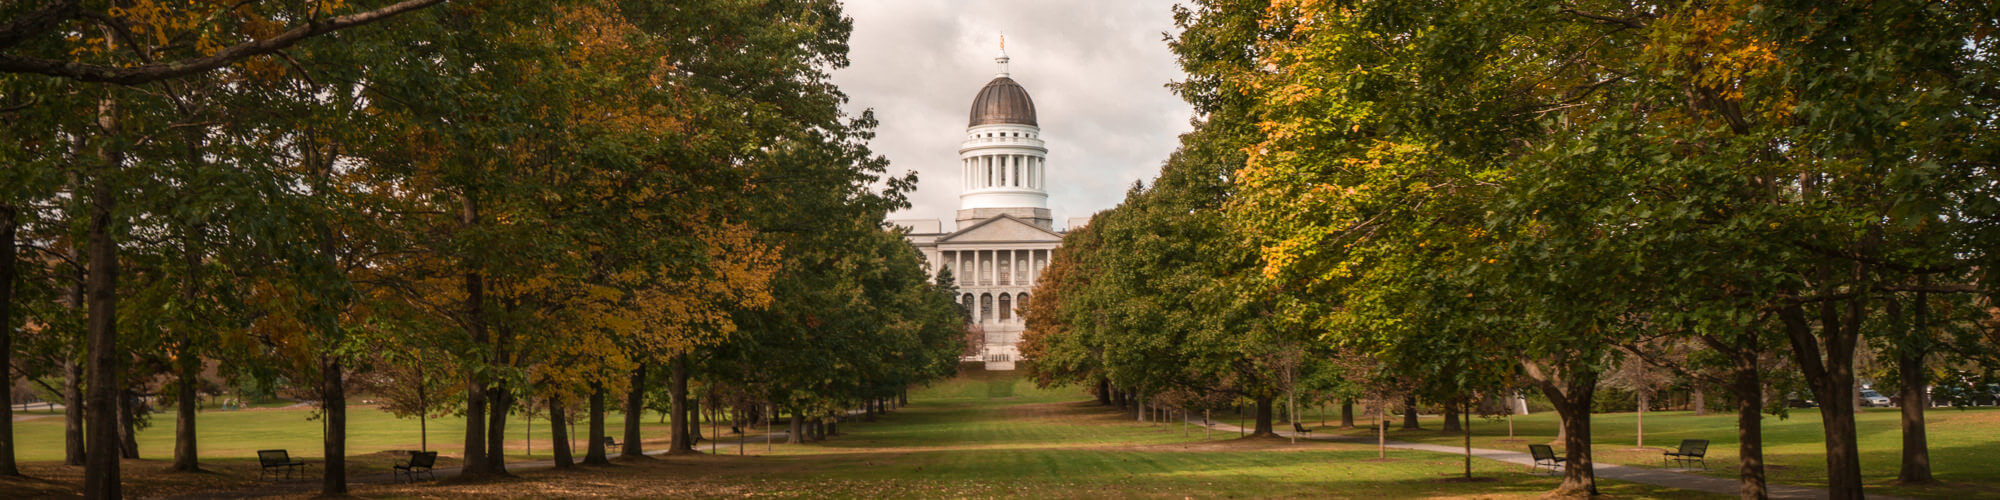 Image of the Maine State Capital building, Augusta, Maine.  Banner image for Soltan Bass LLC 